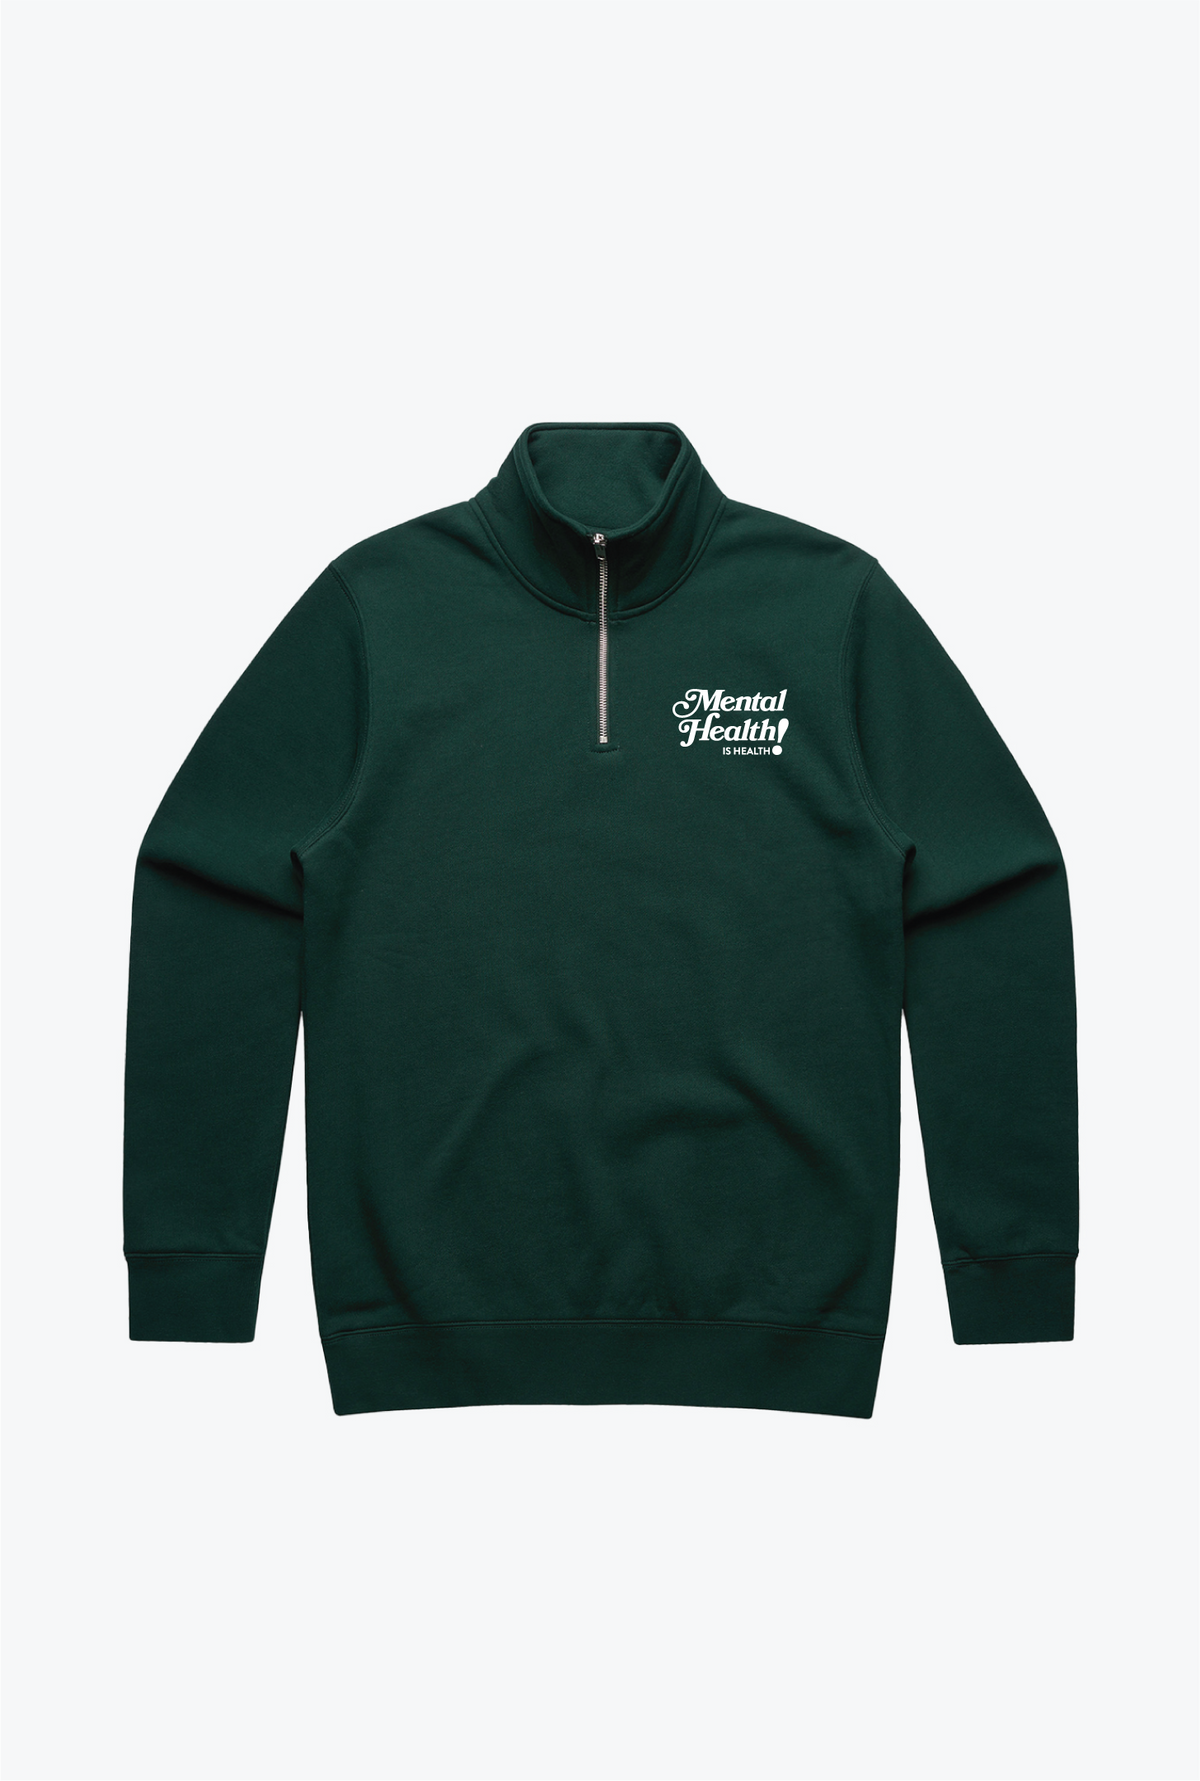 Mental Health is Health 1/4 Zip - Forest Green